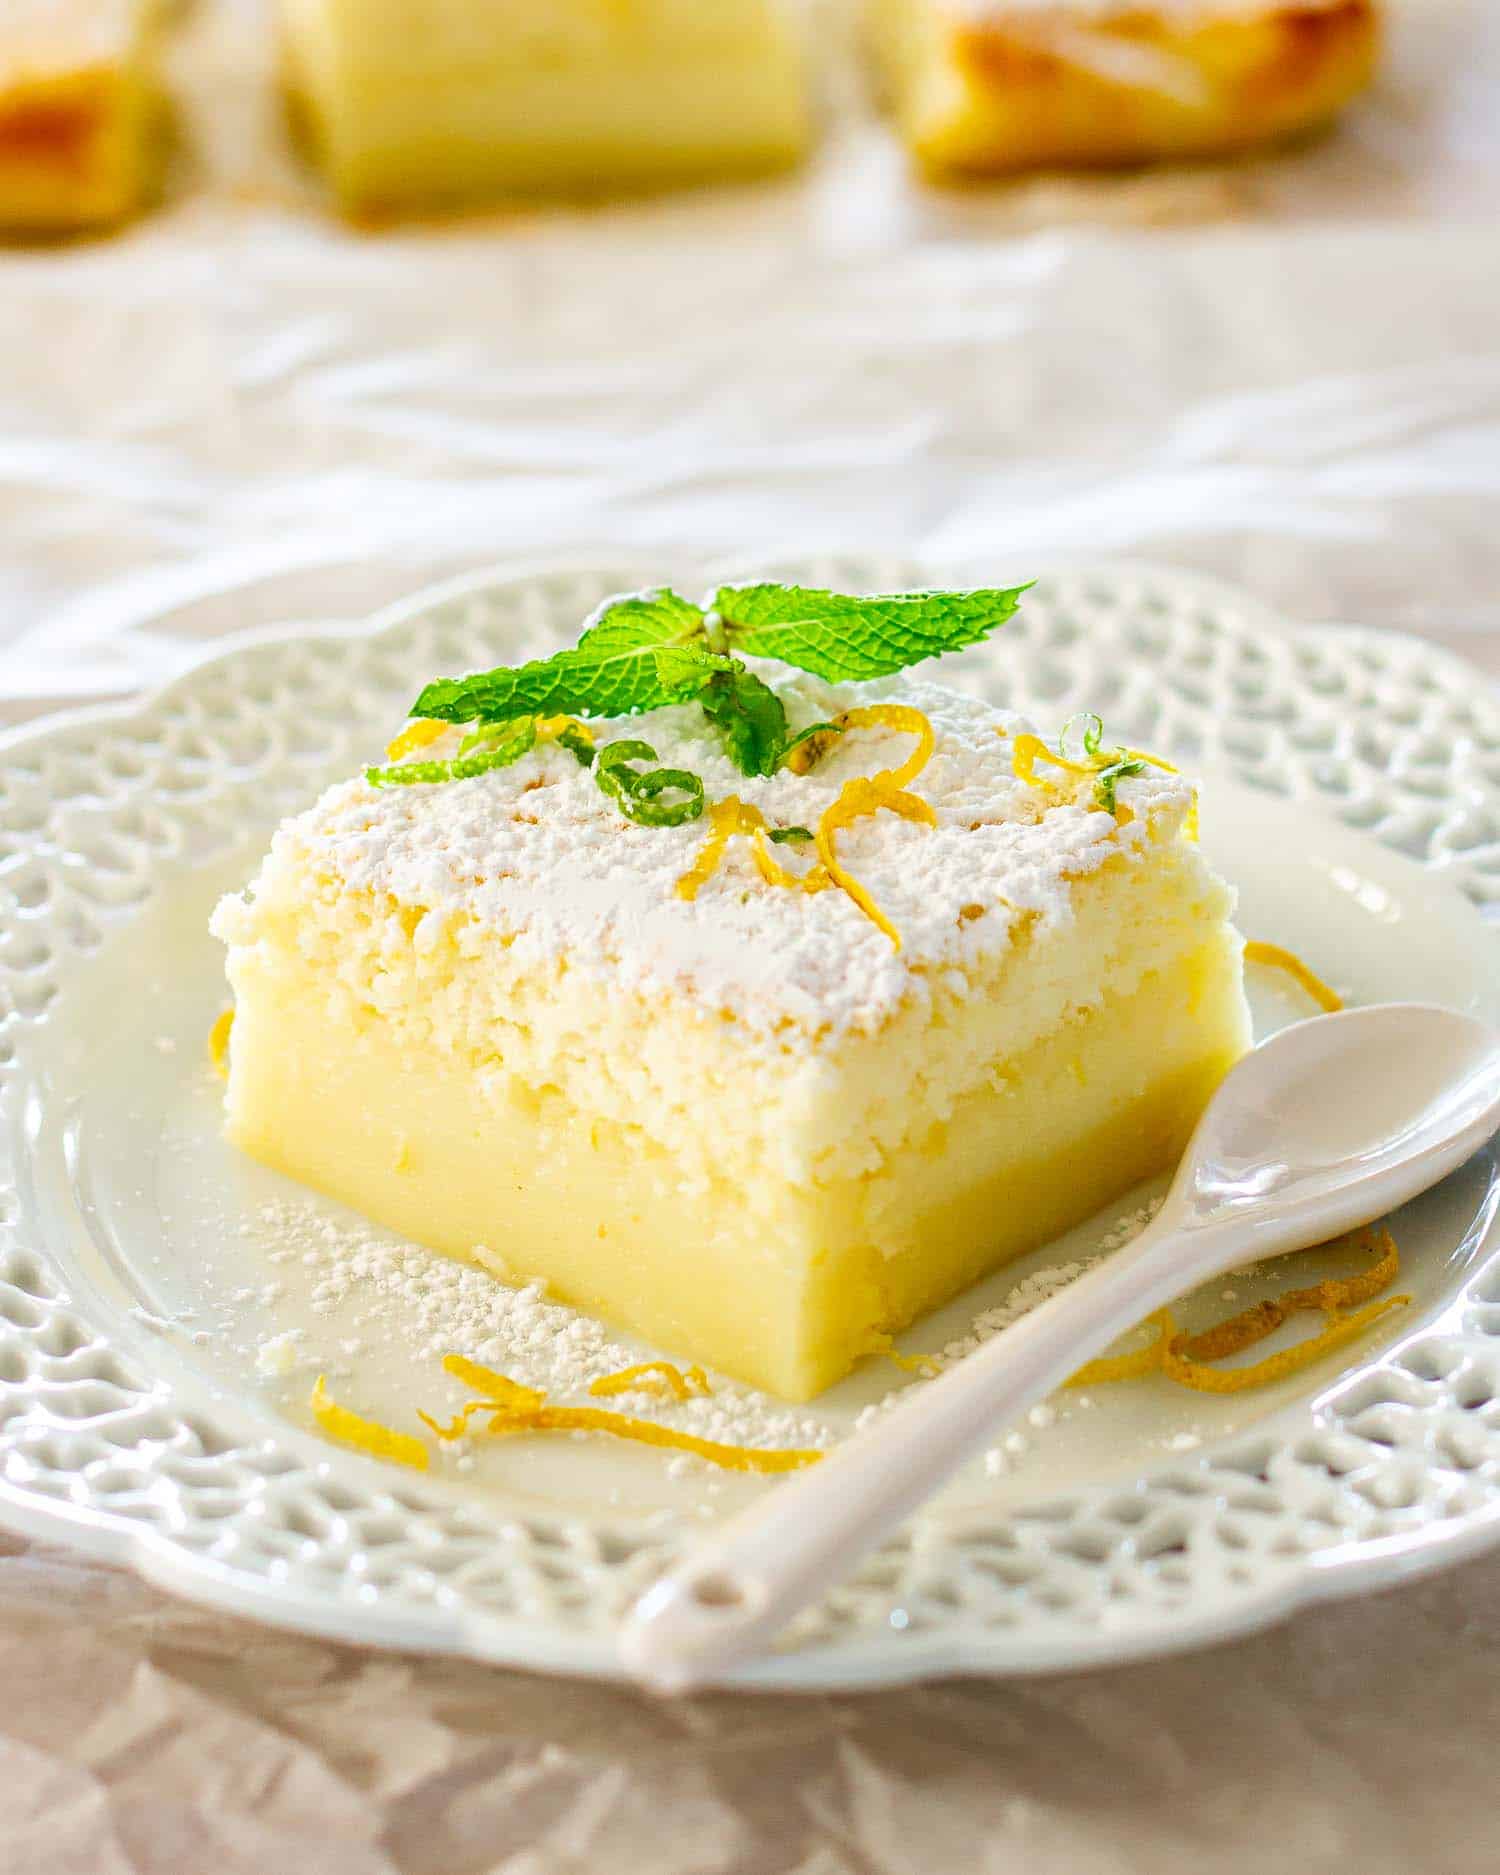 a slice of lemon magic cake garnished with mint on a white plate.